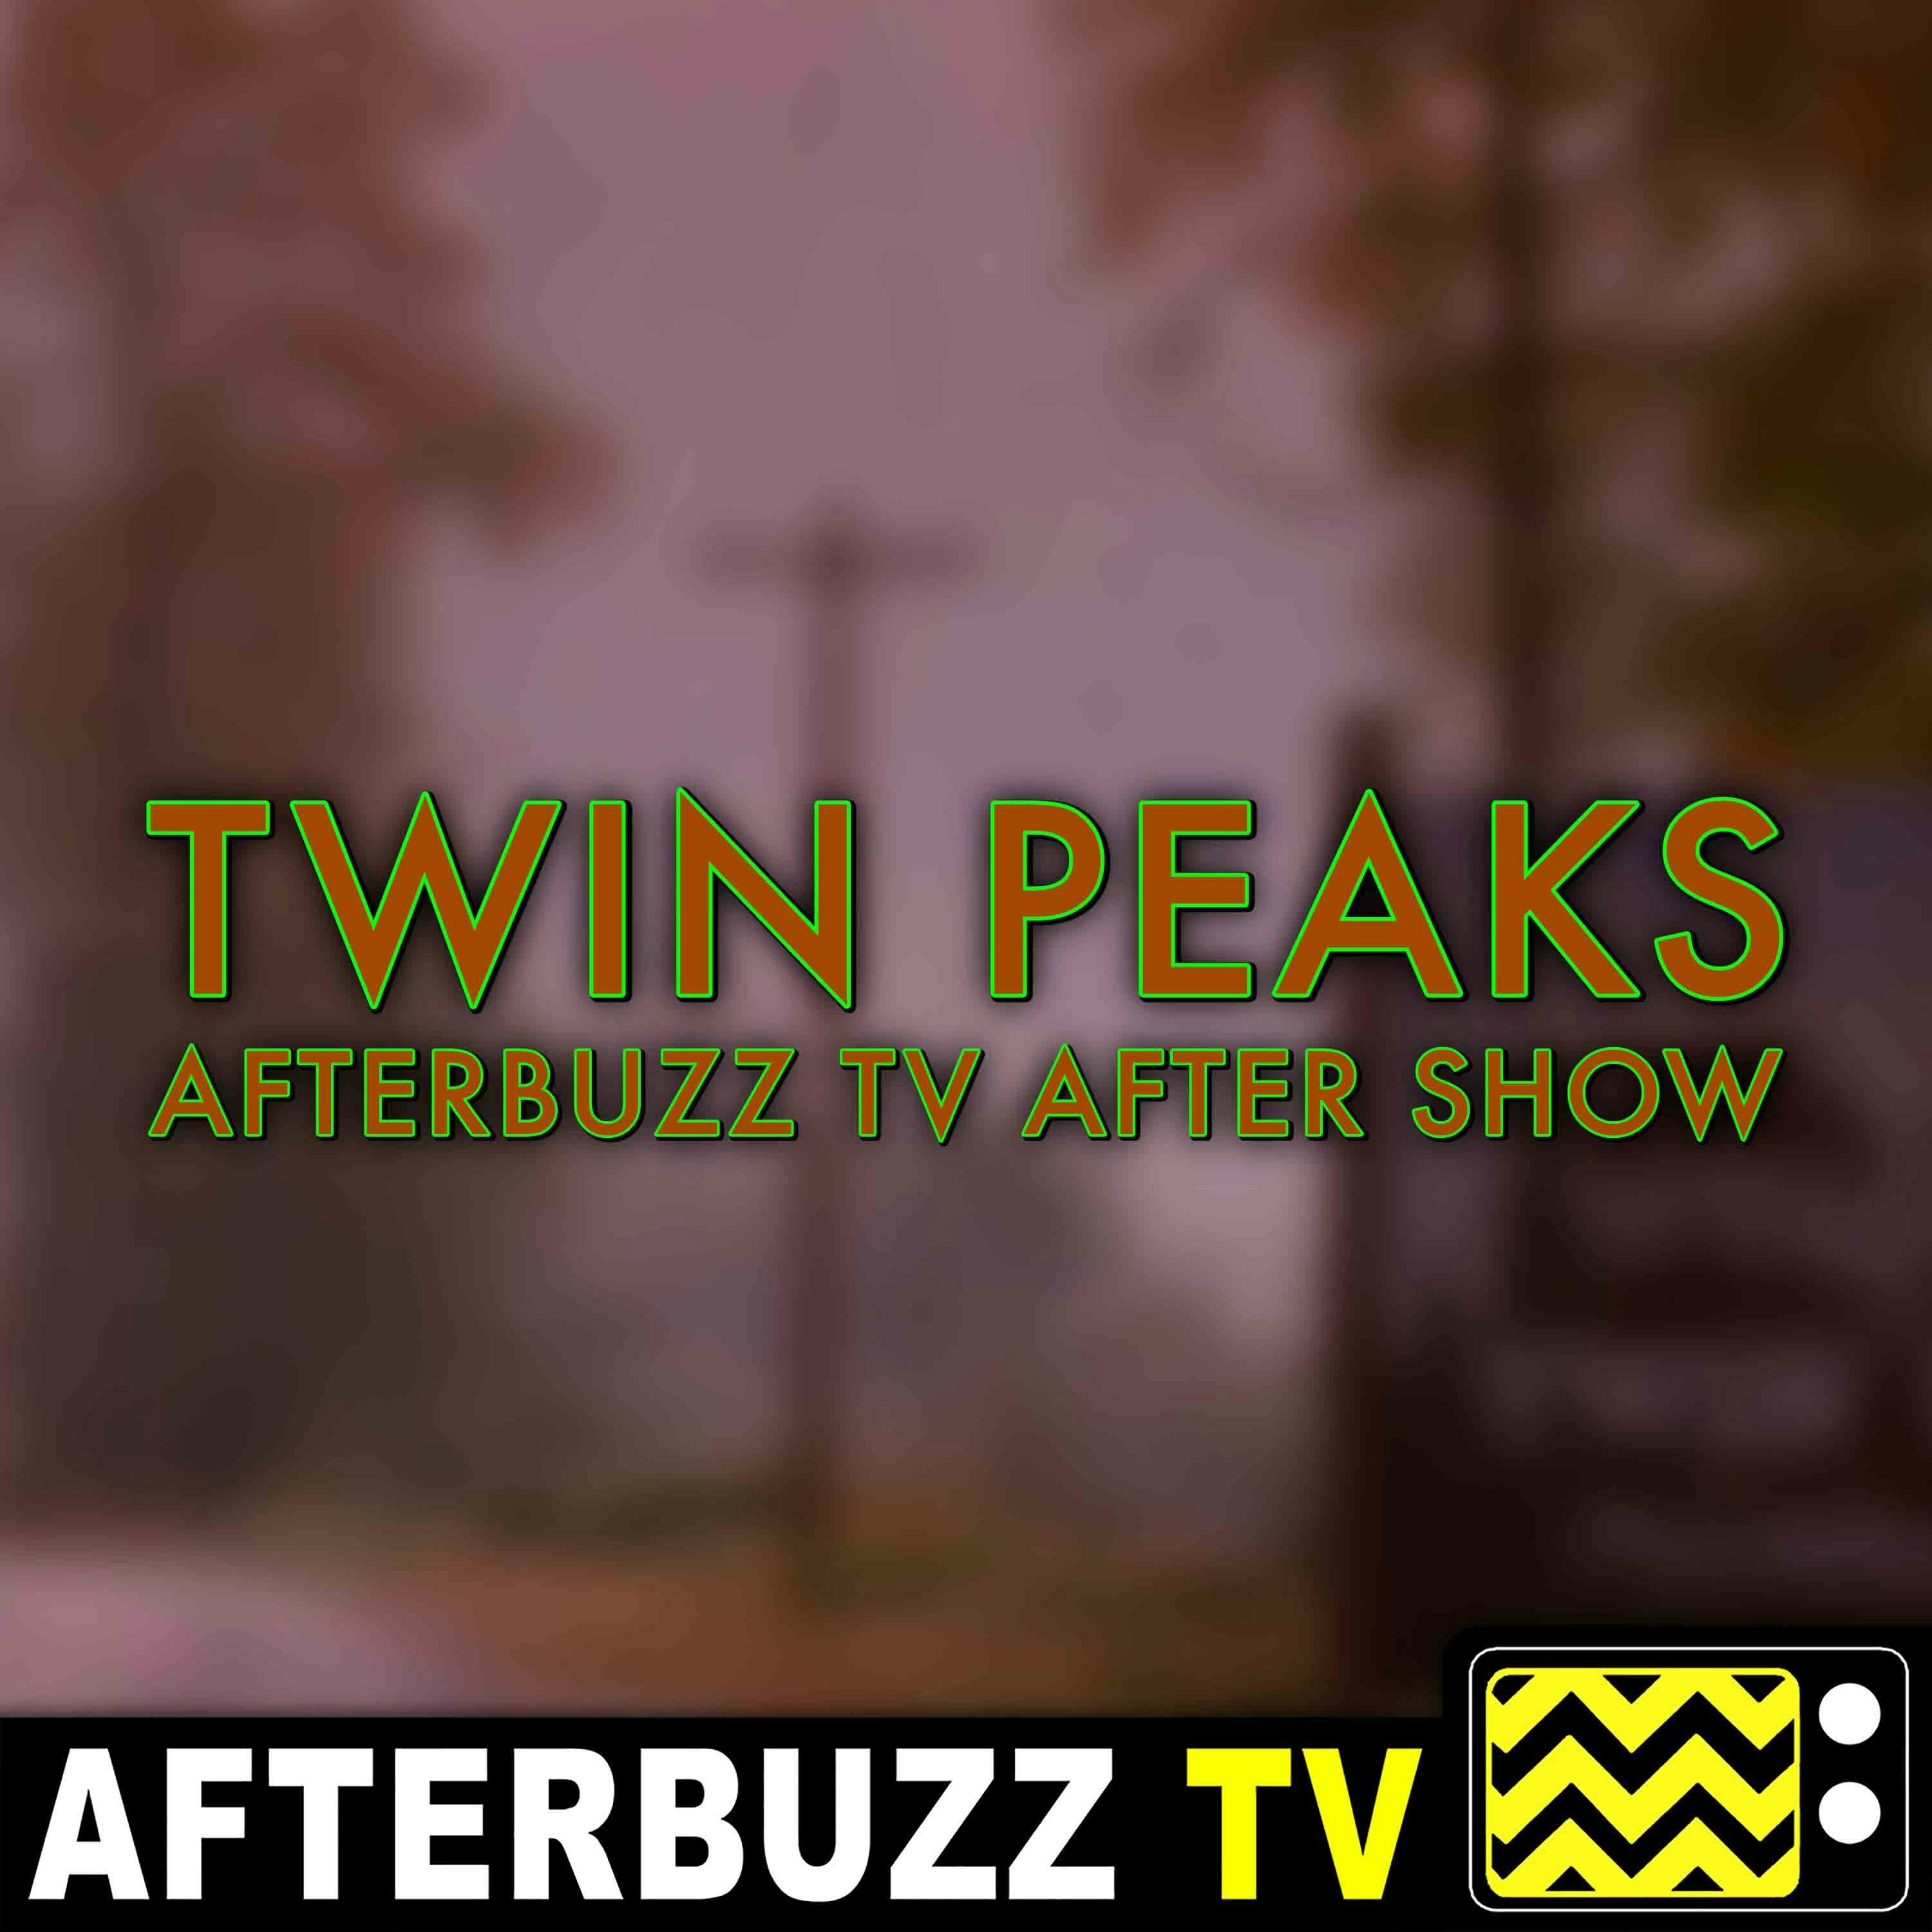 Twin Peaks S:3 | The Return, Parts 3 & 4 E:3 & E:4 | AfterBuzz TV AfterShow